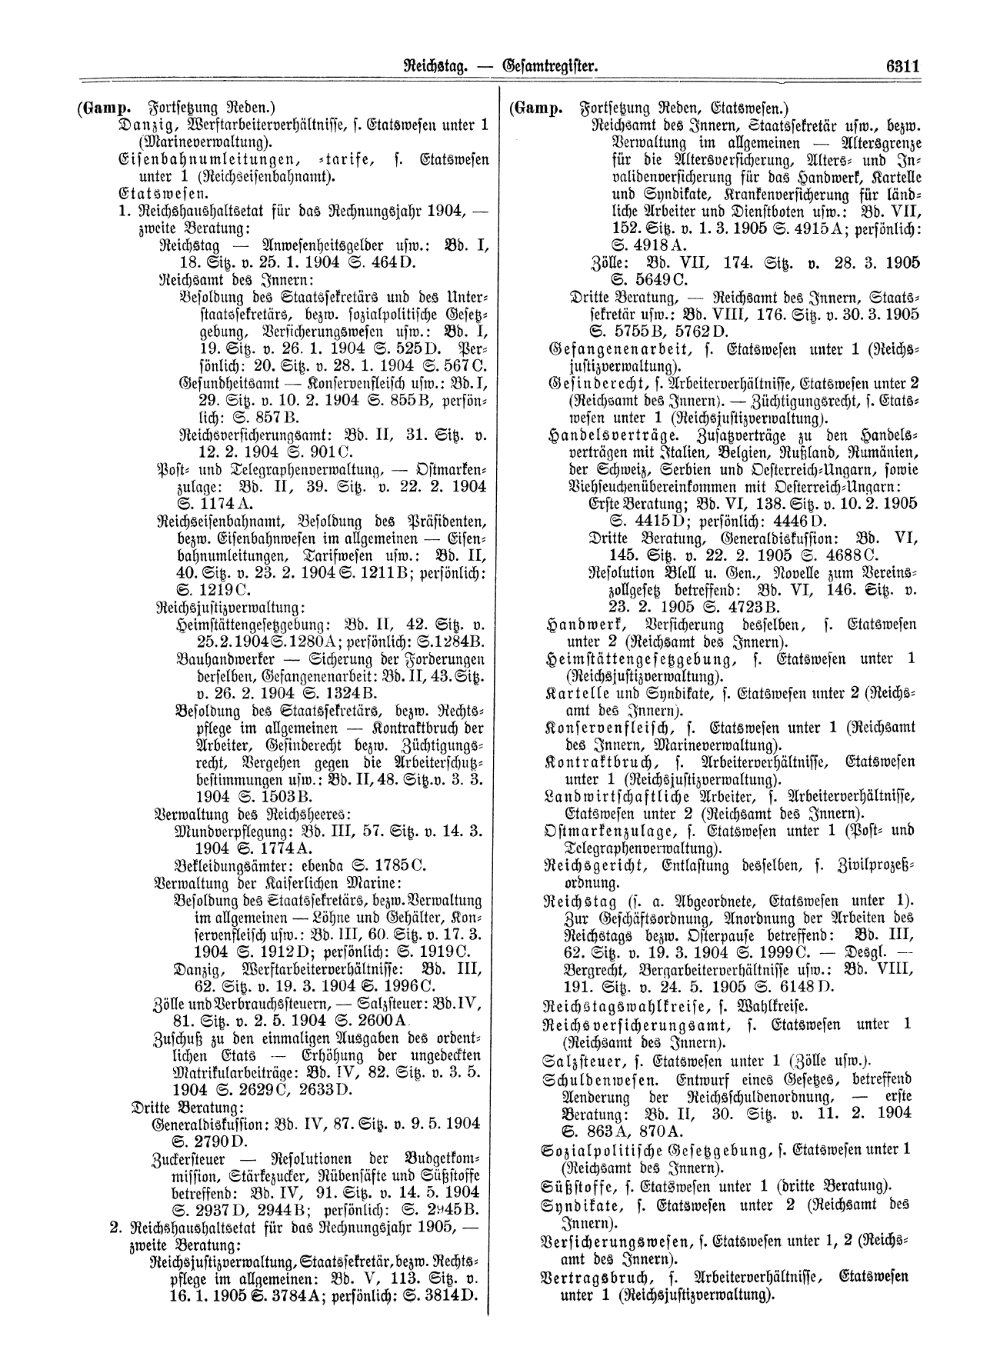 Scan of page 6311